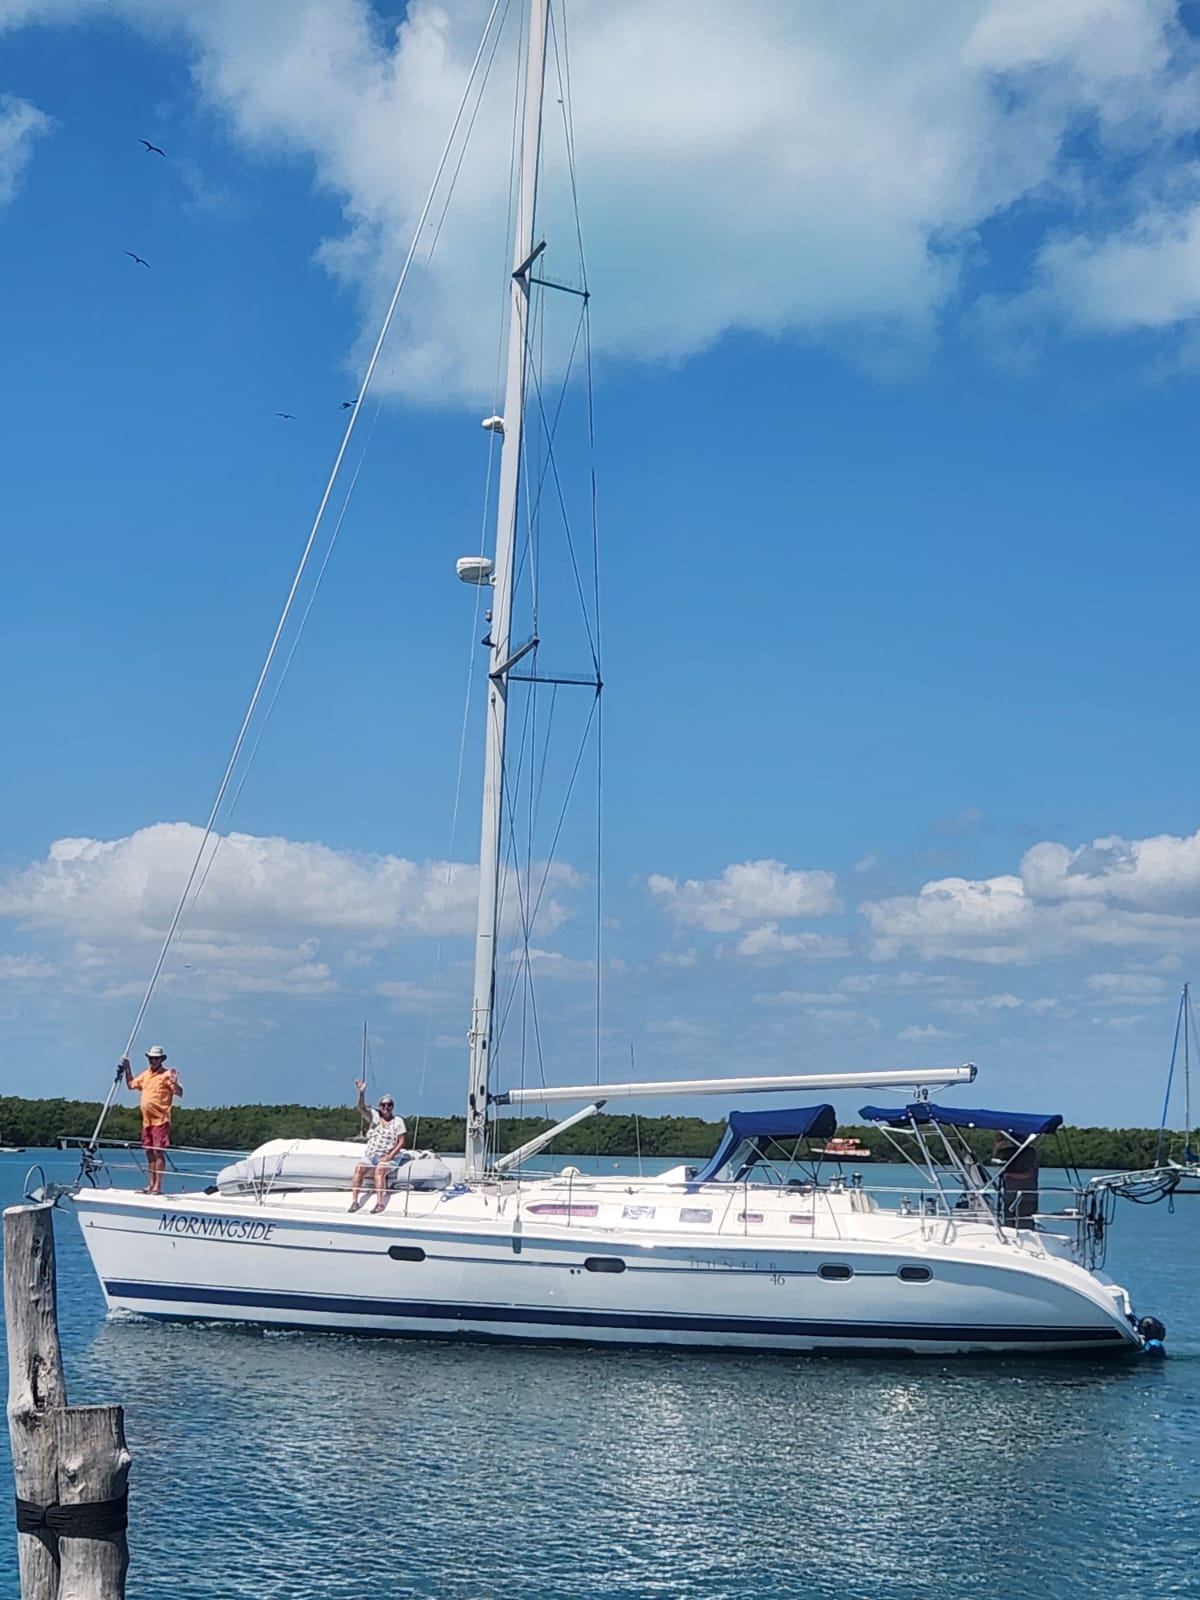 2005 Hunter 46LE Sailboat for sale in Mexico - image 1 